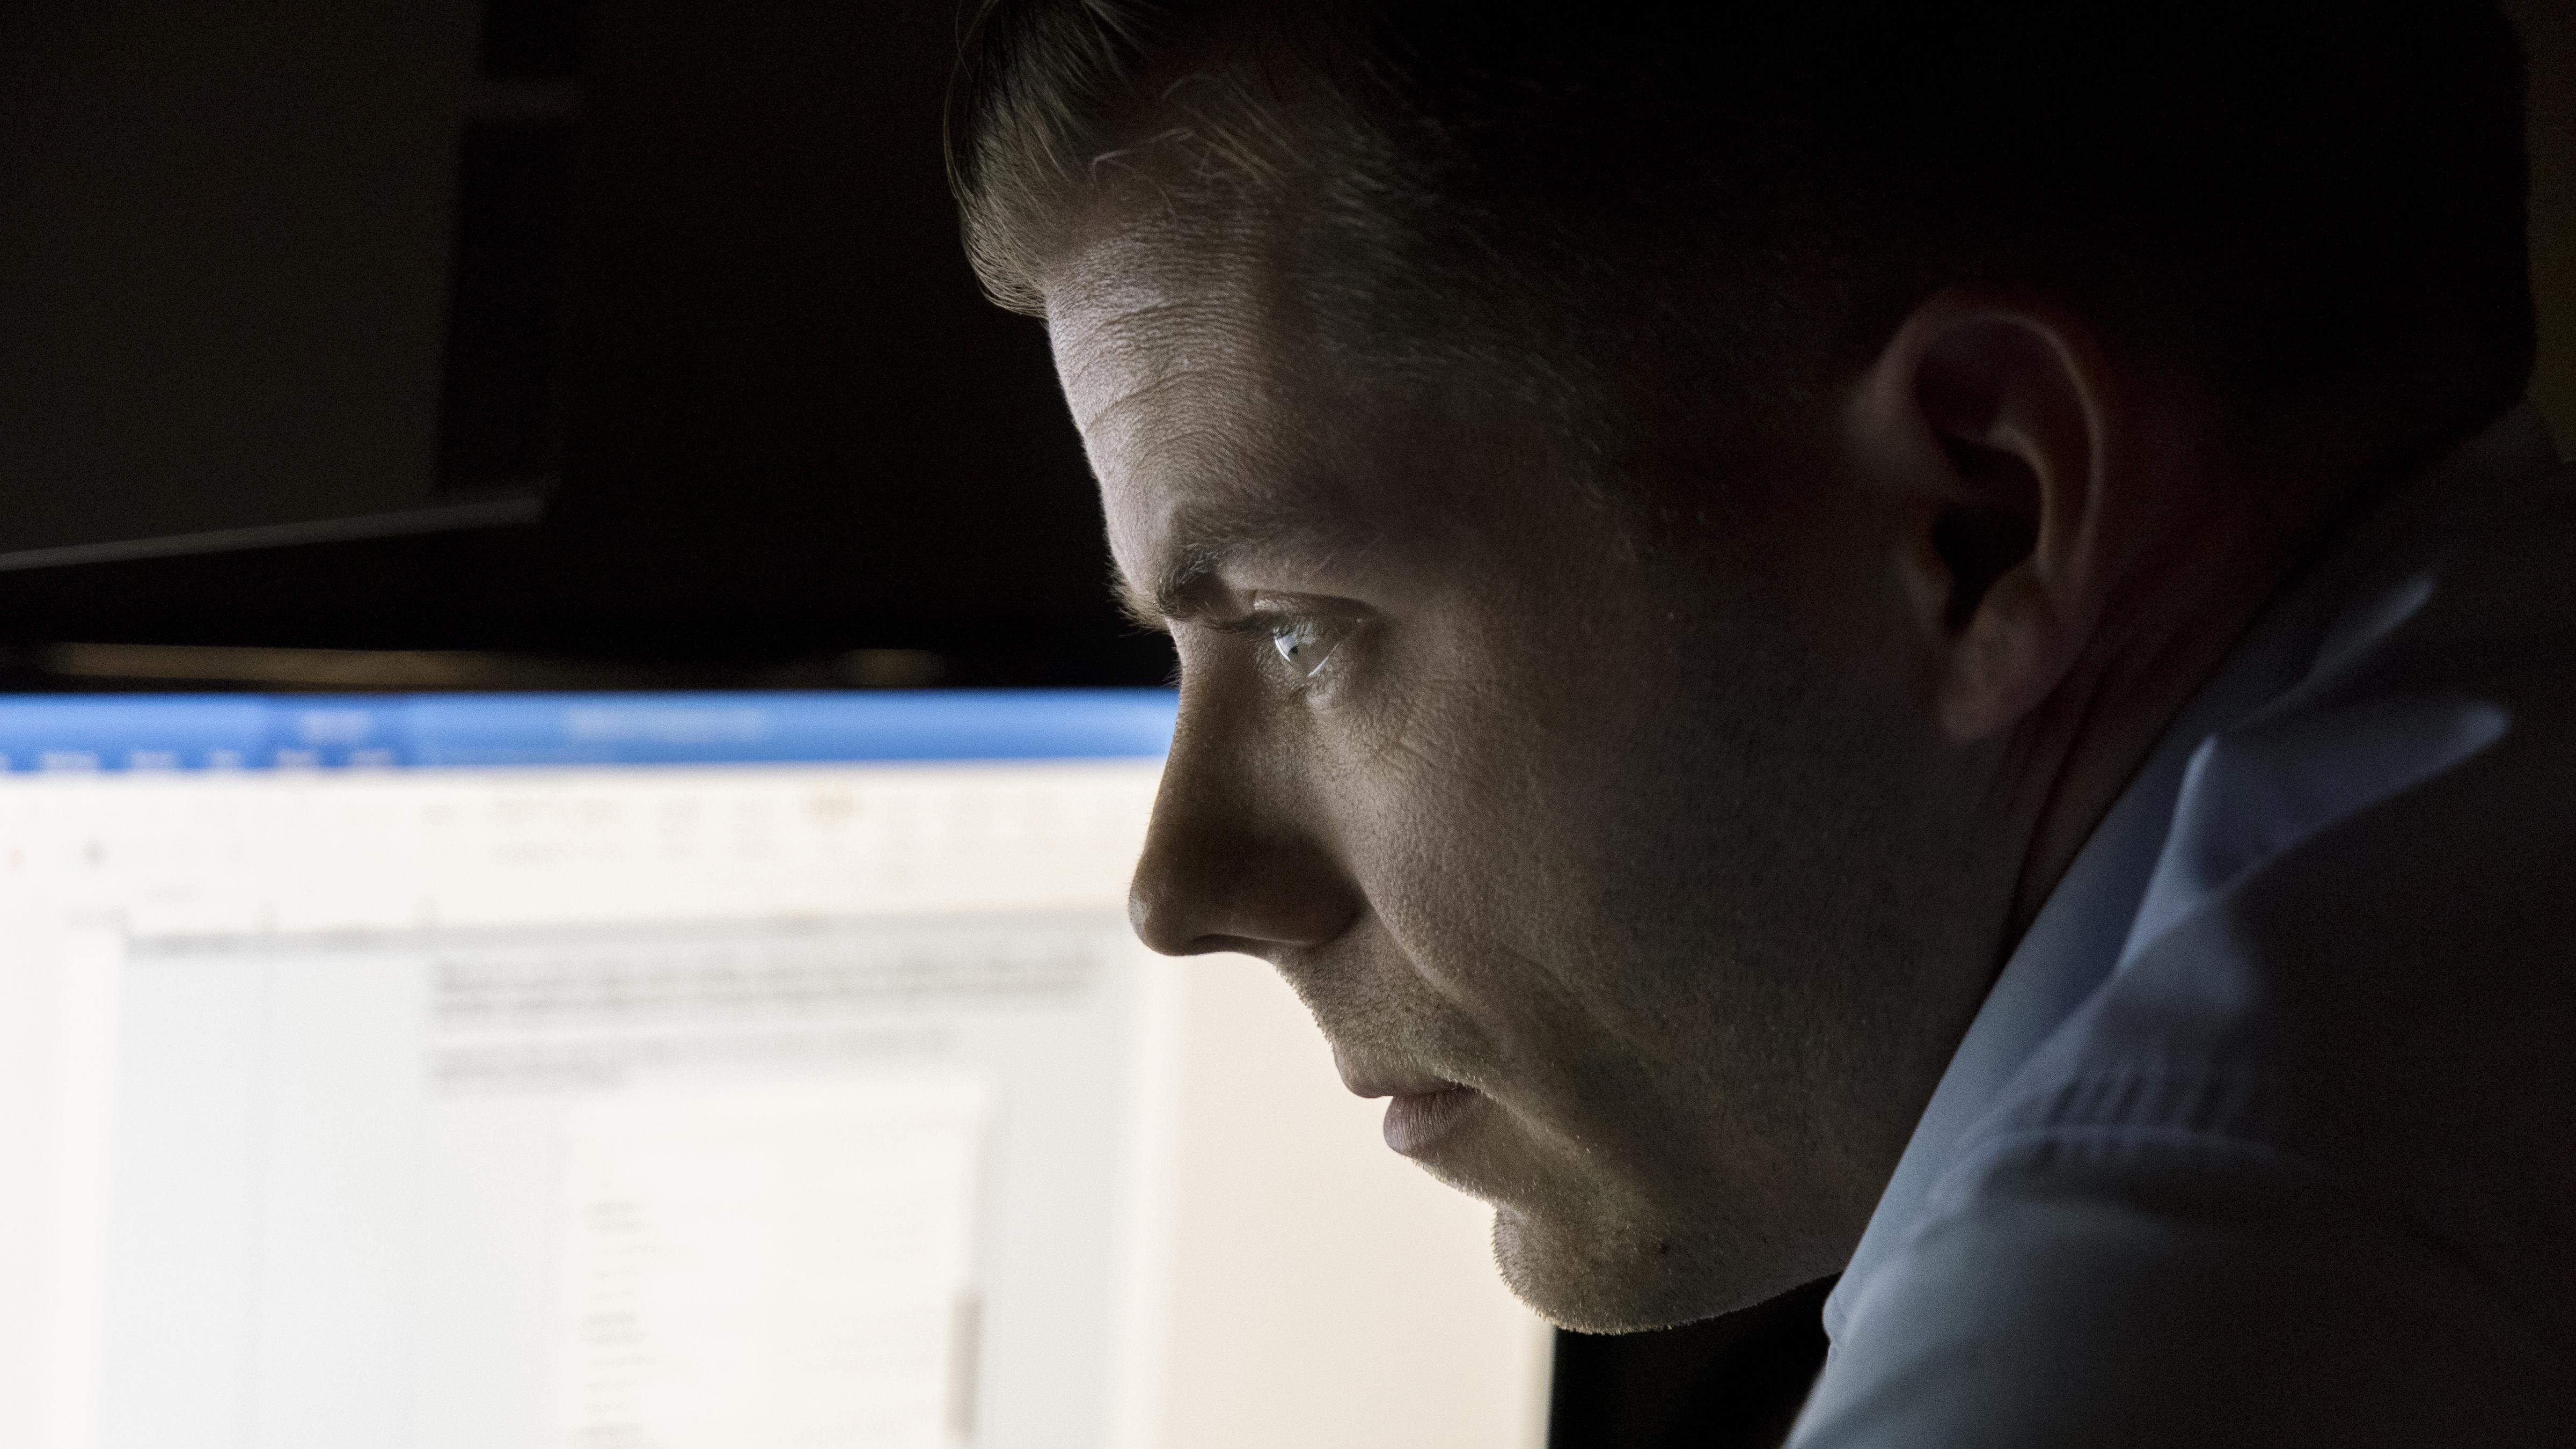 Army CID Special Agent studies a computer screen displaying evidence from a crime scene